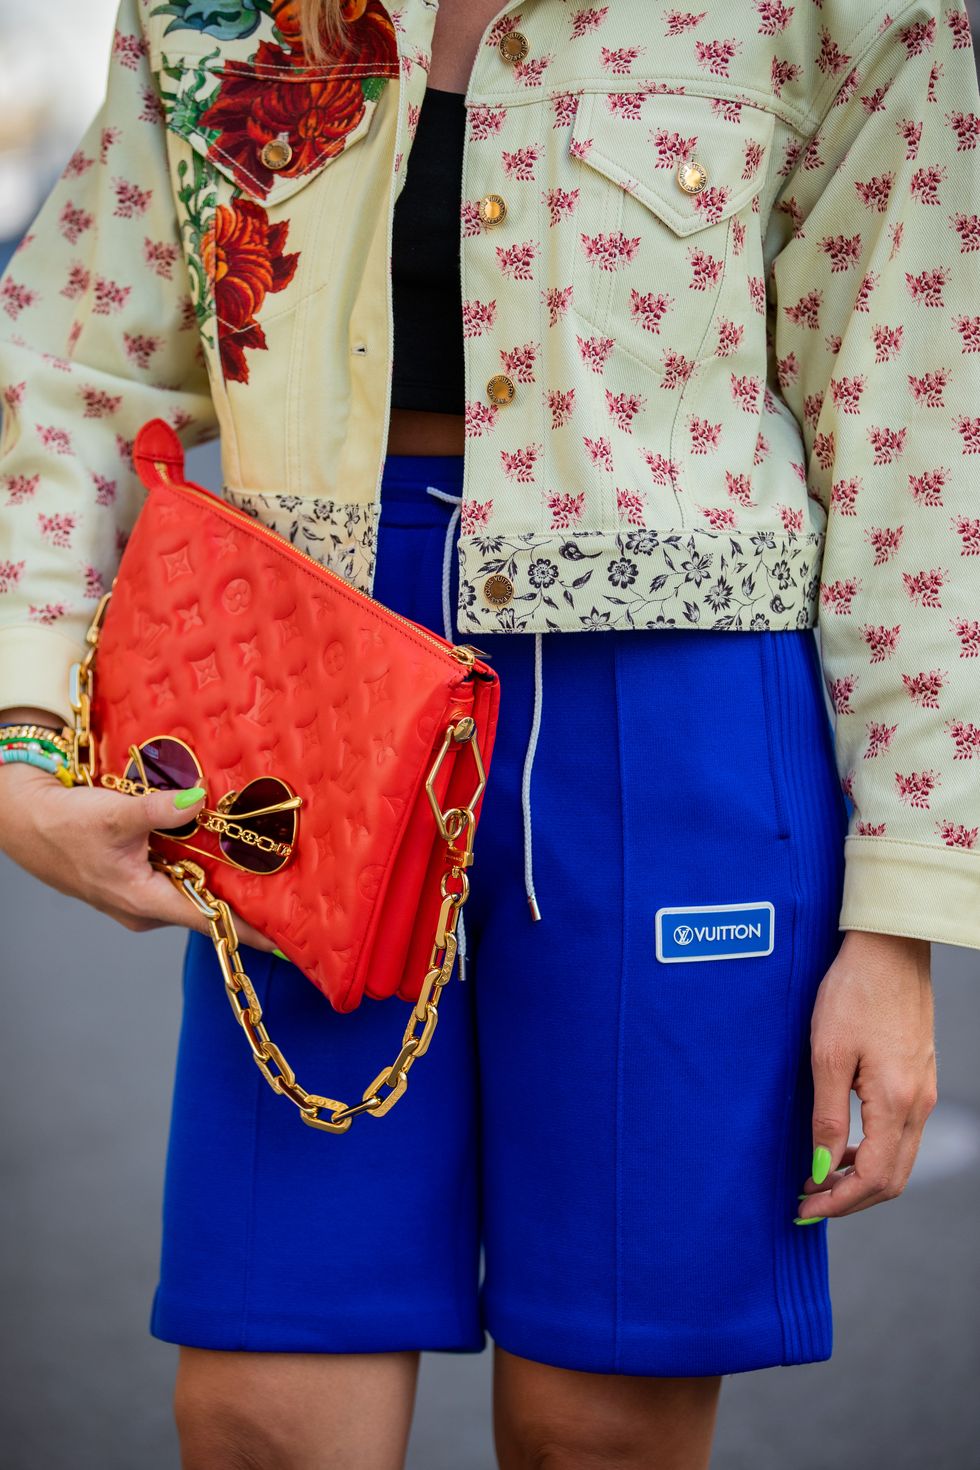 berlin, germany   june 15 sonia lyson is seen wearing total look louis vuitton, red bag, blue shorts, jacket with floral print, sandals with logo print and cropped black top on june 15, 2021 in berlin, germany photo by christian vieriggetty images